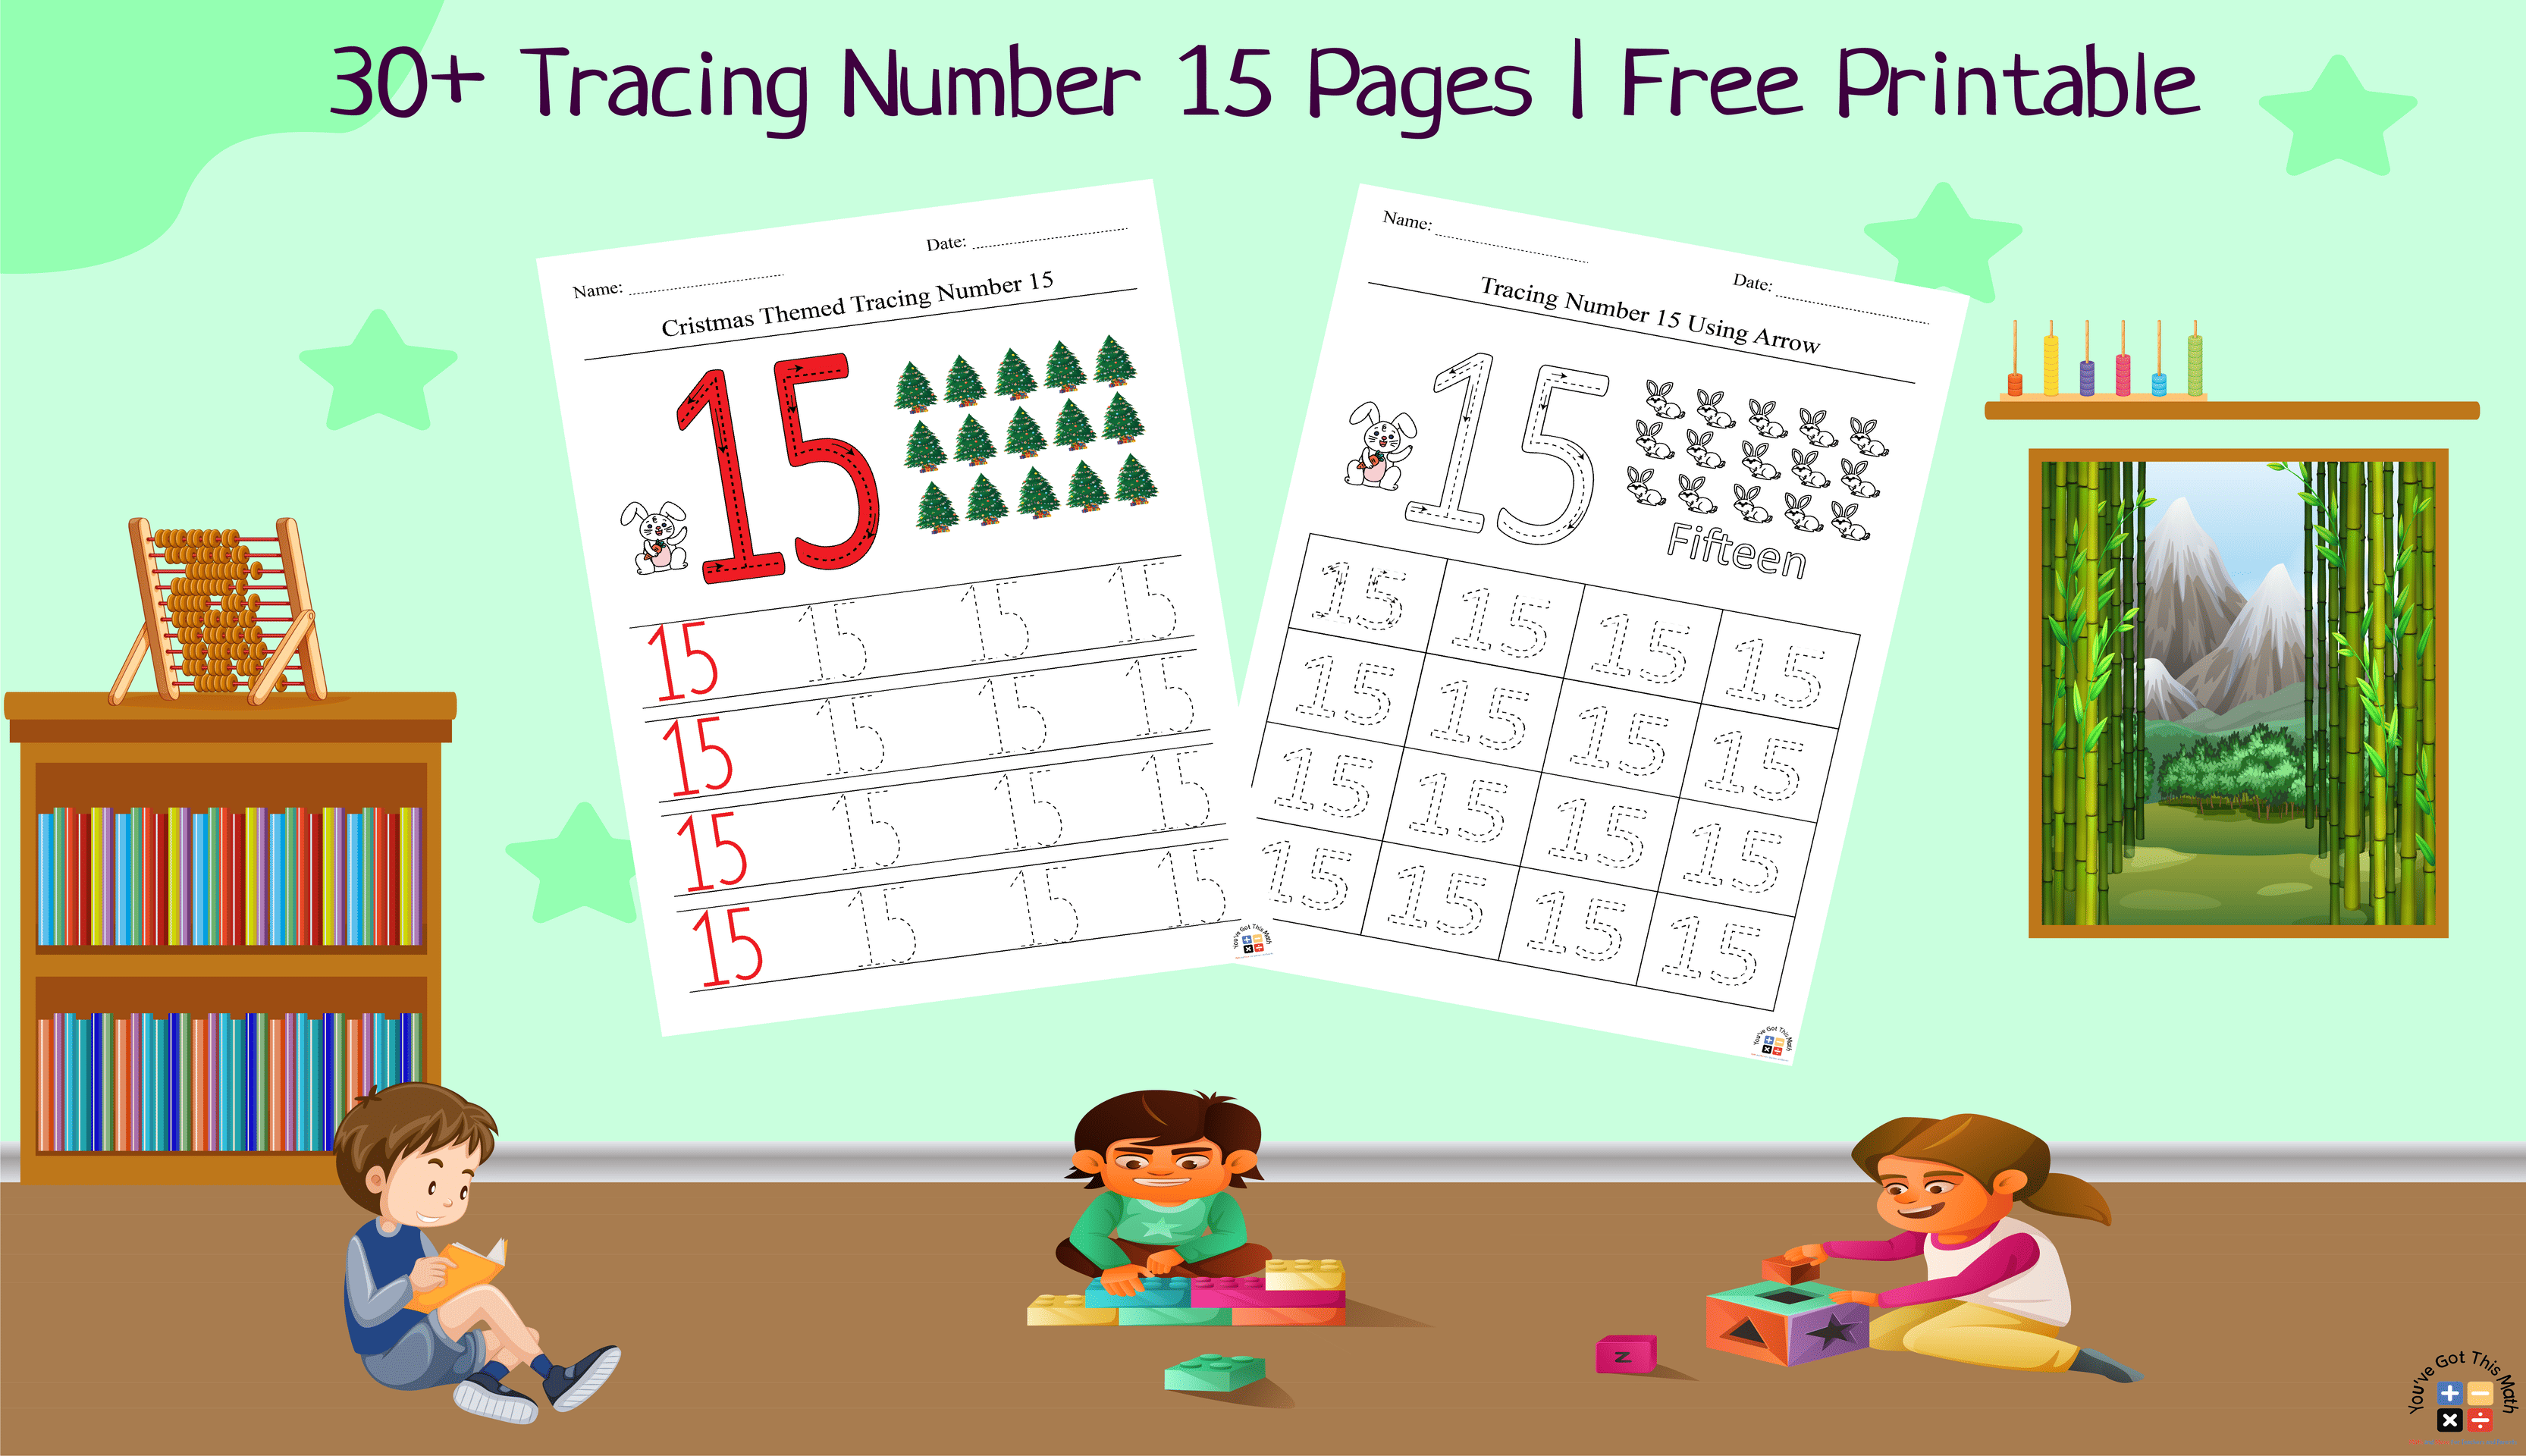 30+ Tracing Number 15 Pages | Free Printable